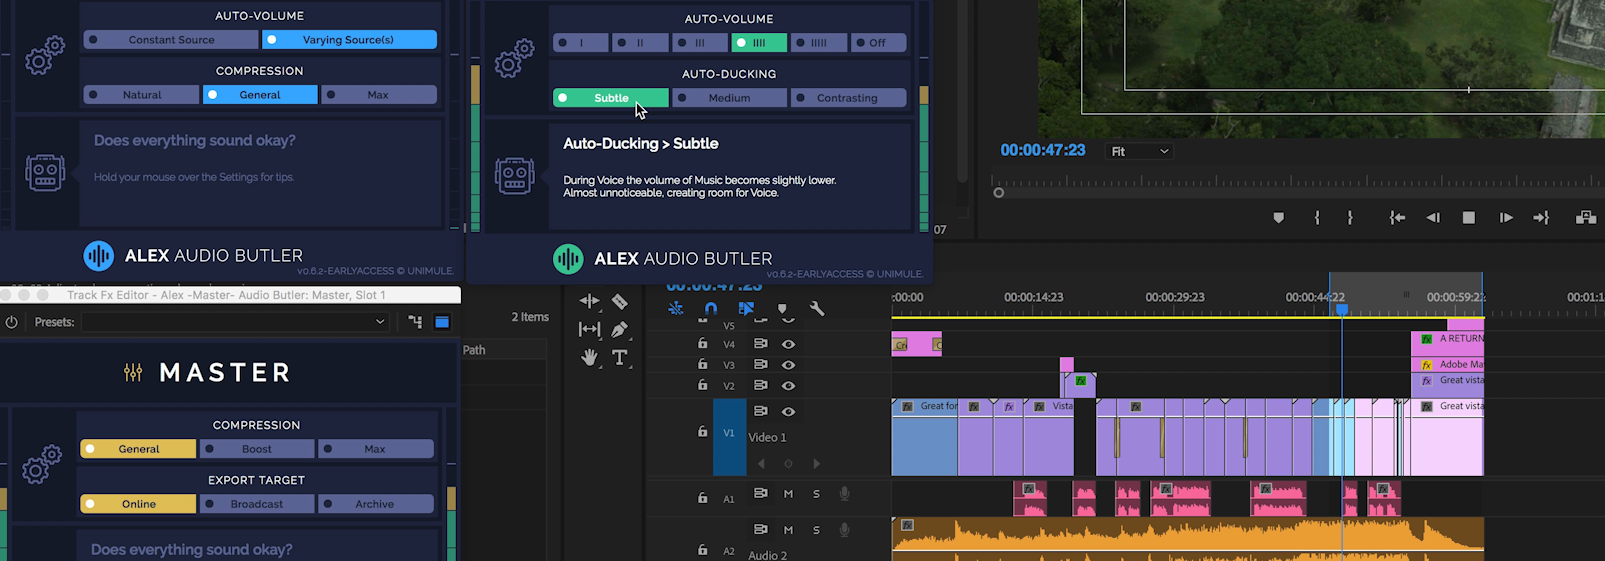 Alex Audio Butler - Early Access - in use in an Adobe Premiere Pro CC example project.